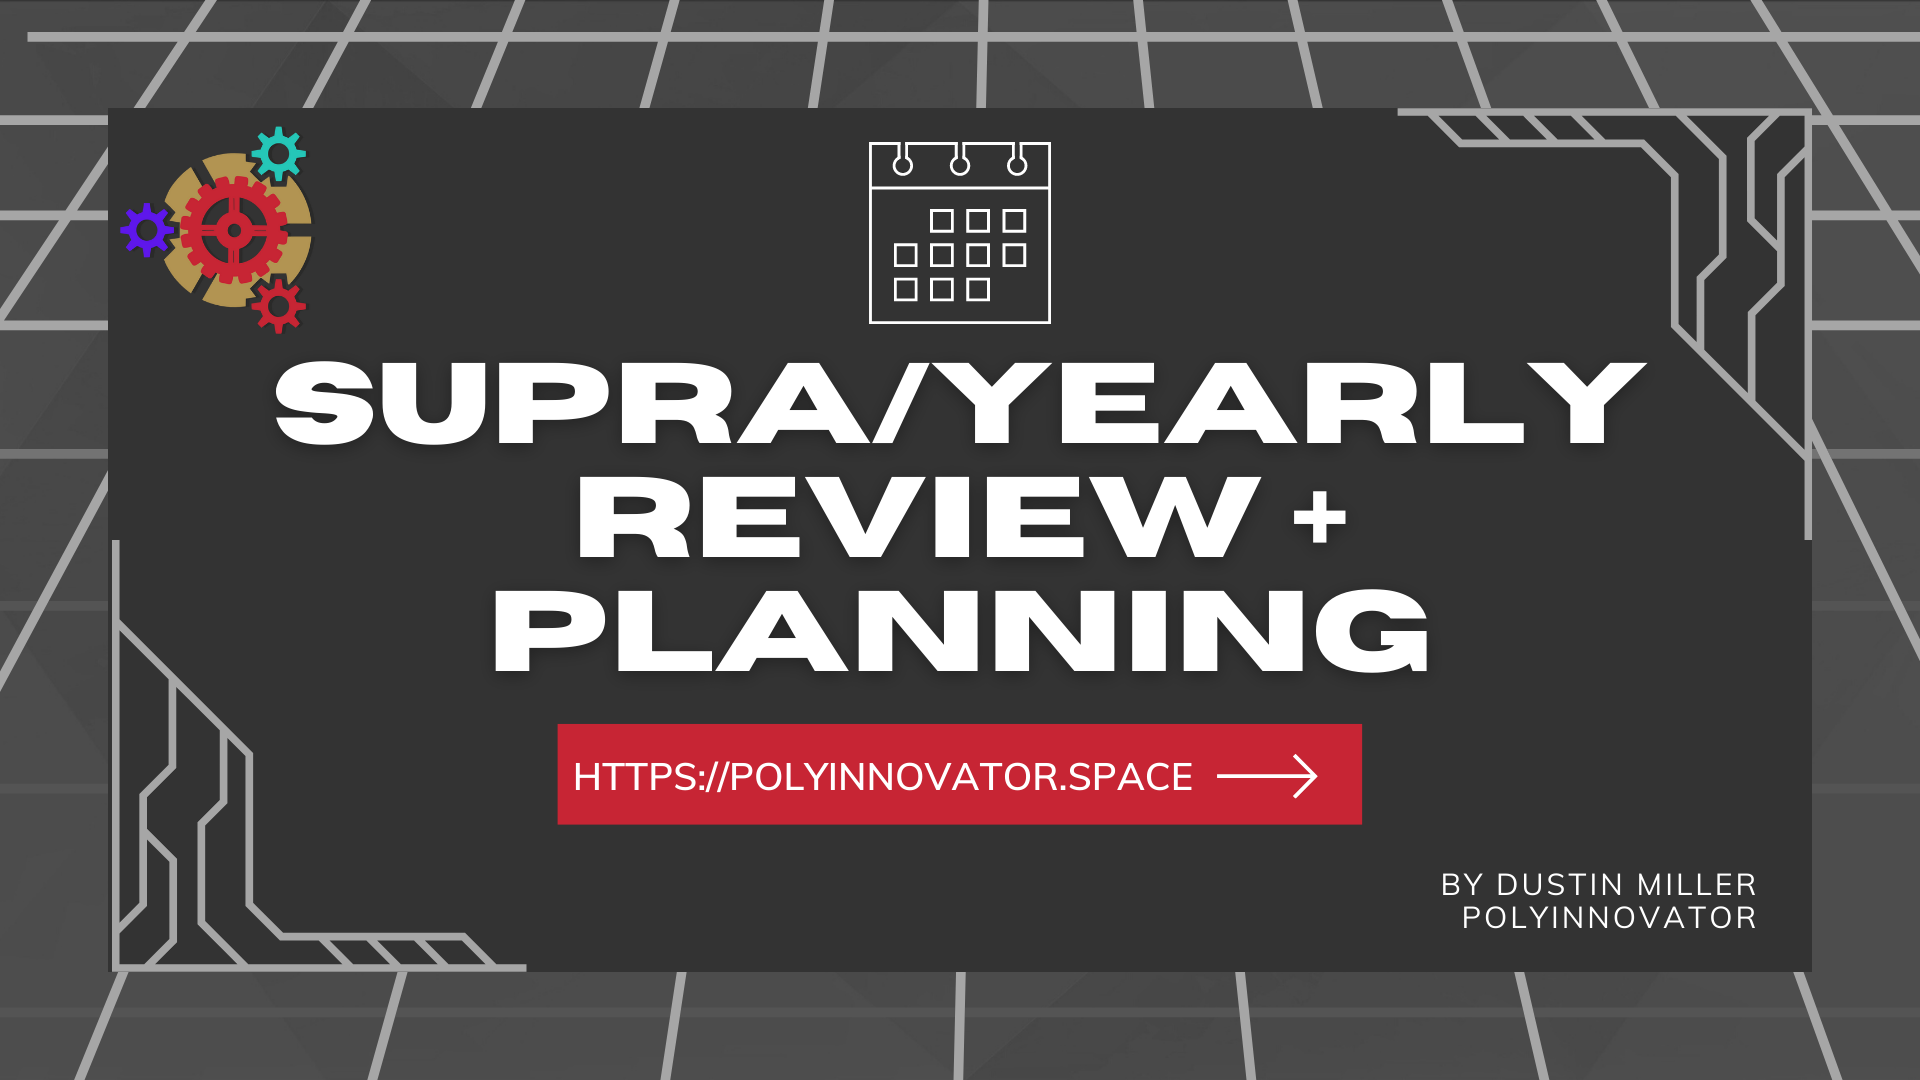 Supra/Yearly - Review + Planning